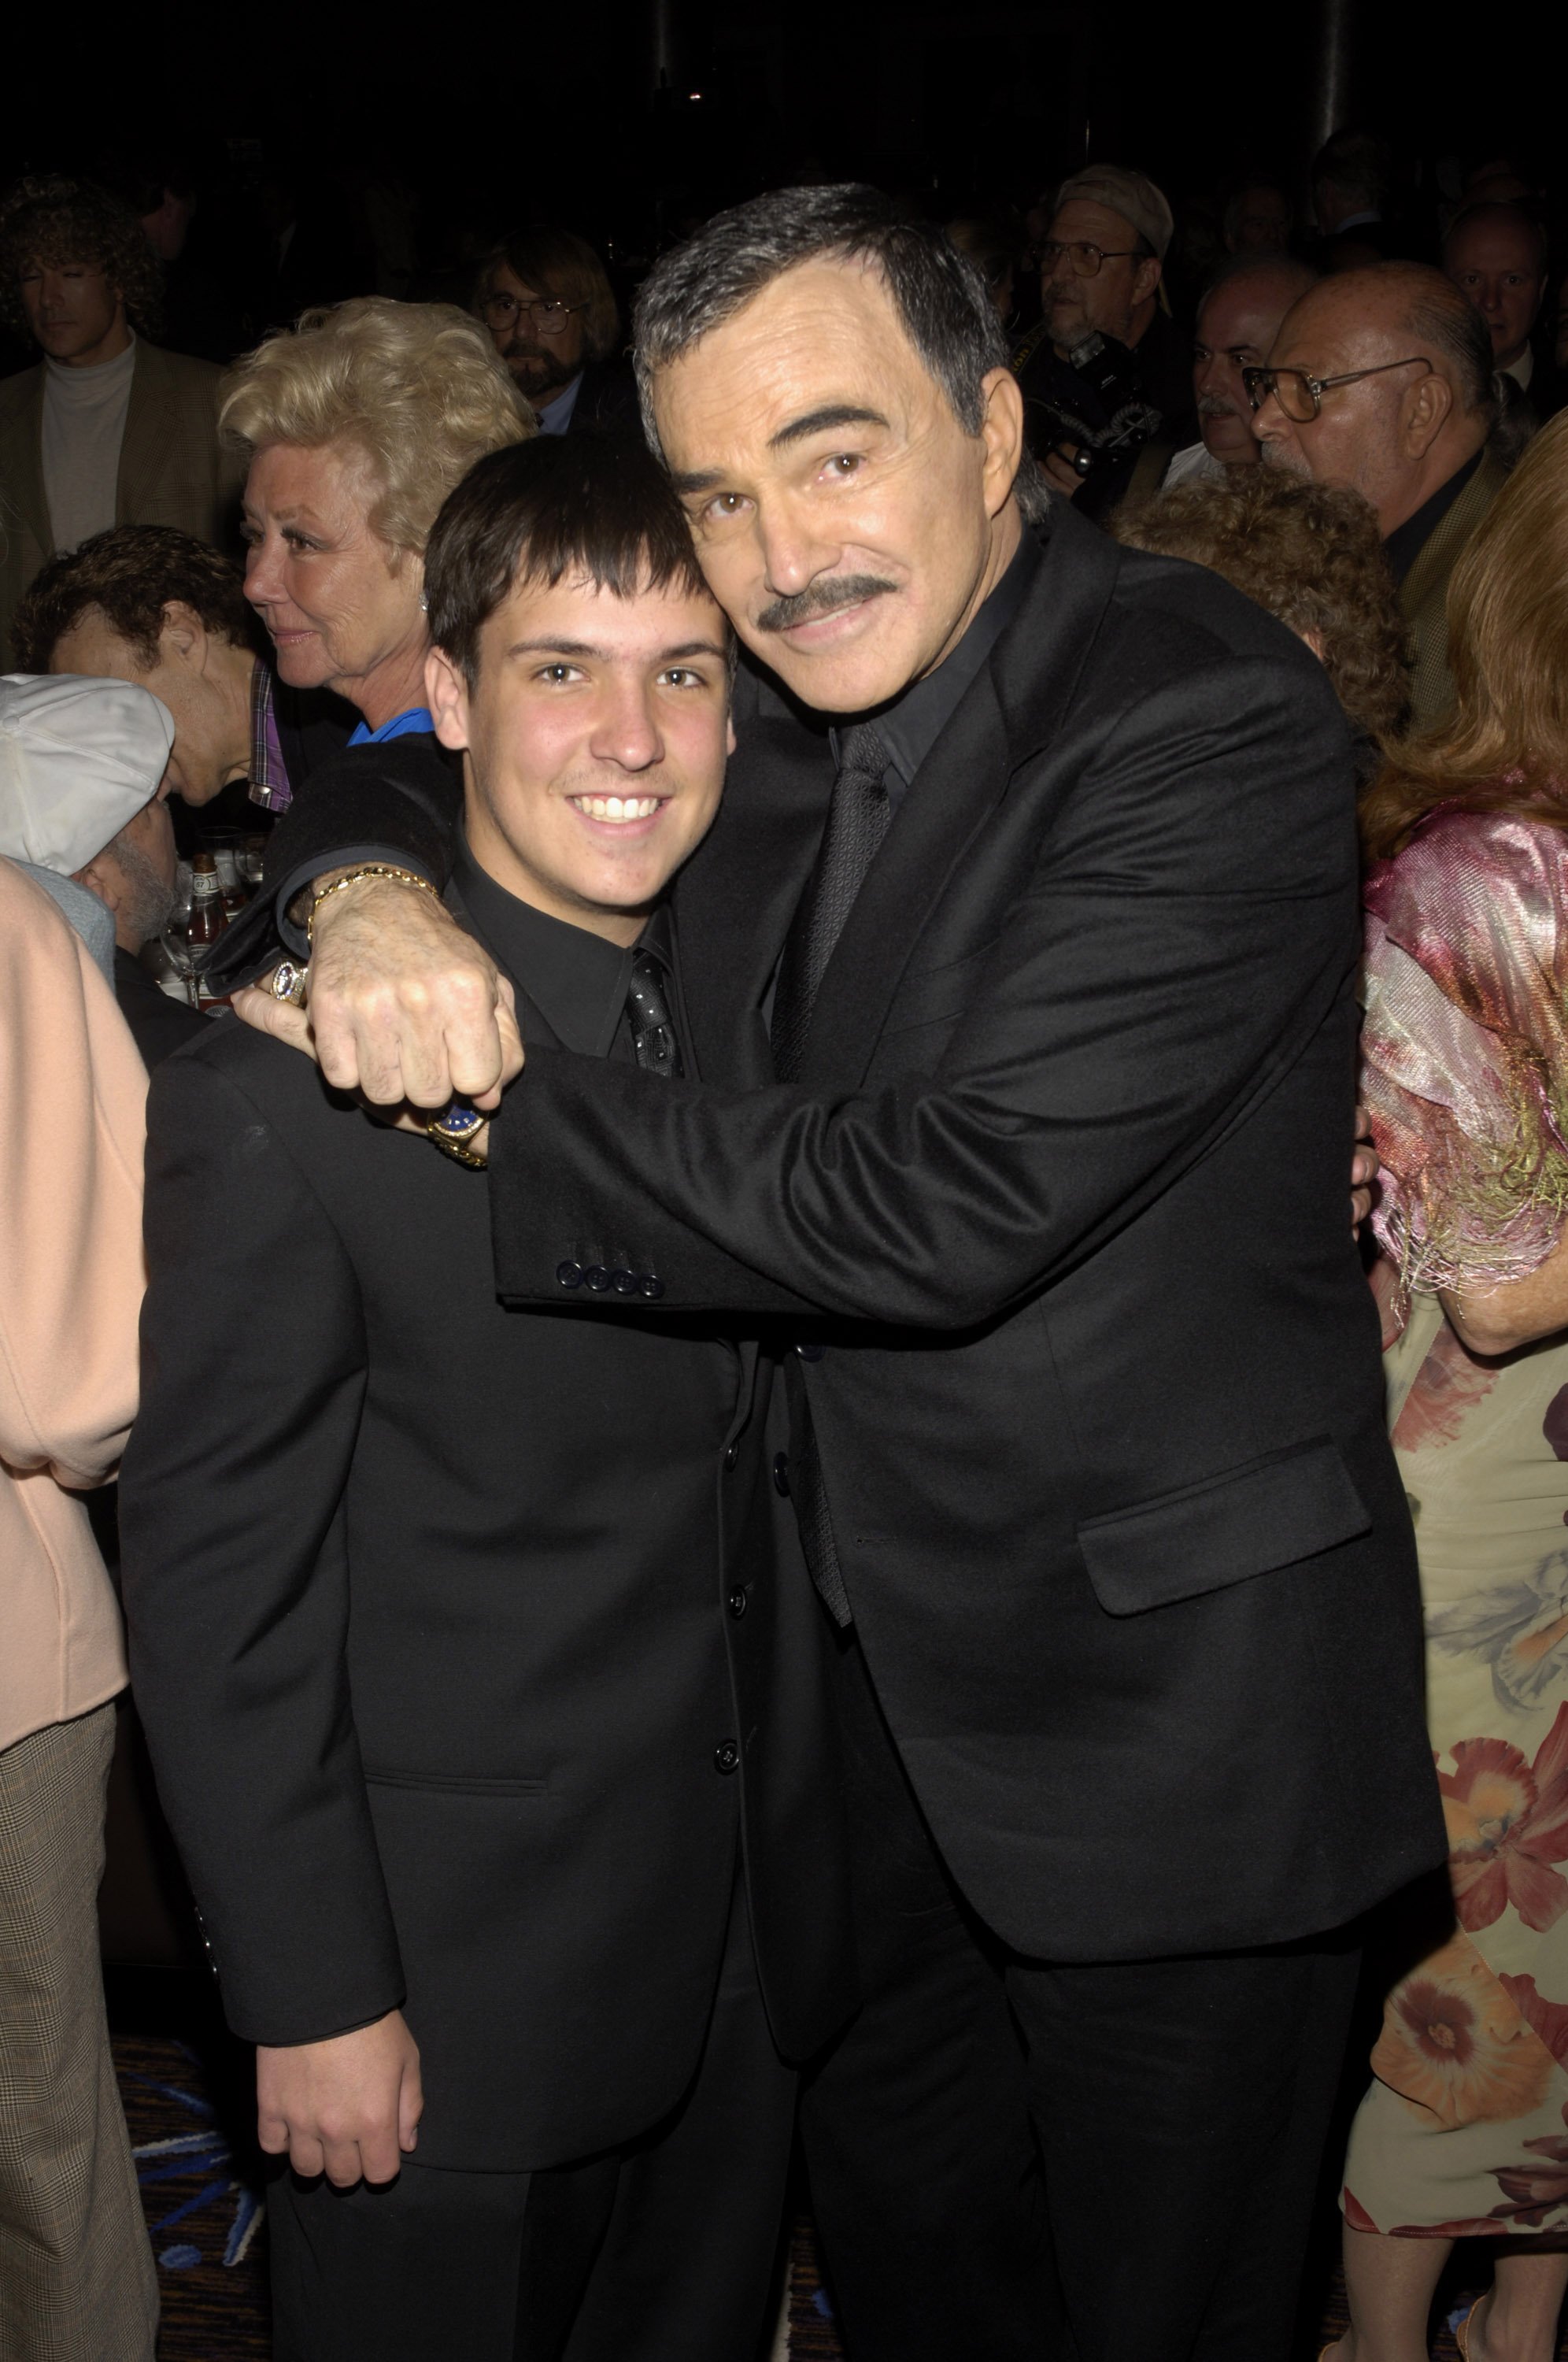 Quinton Reynolds and his father Burt Reynolds during 2005 Professional Dancers Society Annual Gypsy Awards in Los Angeles, California. / Source: Getty Images